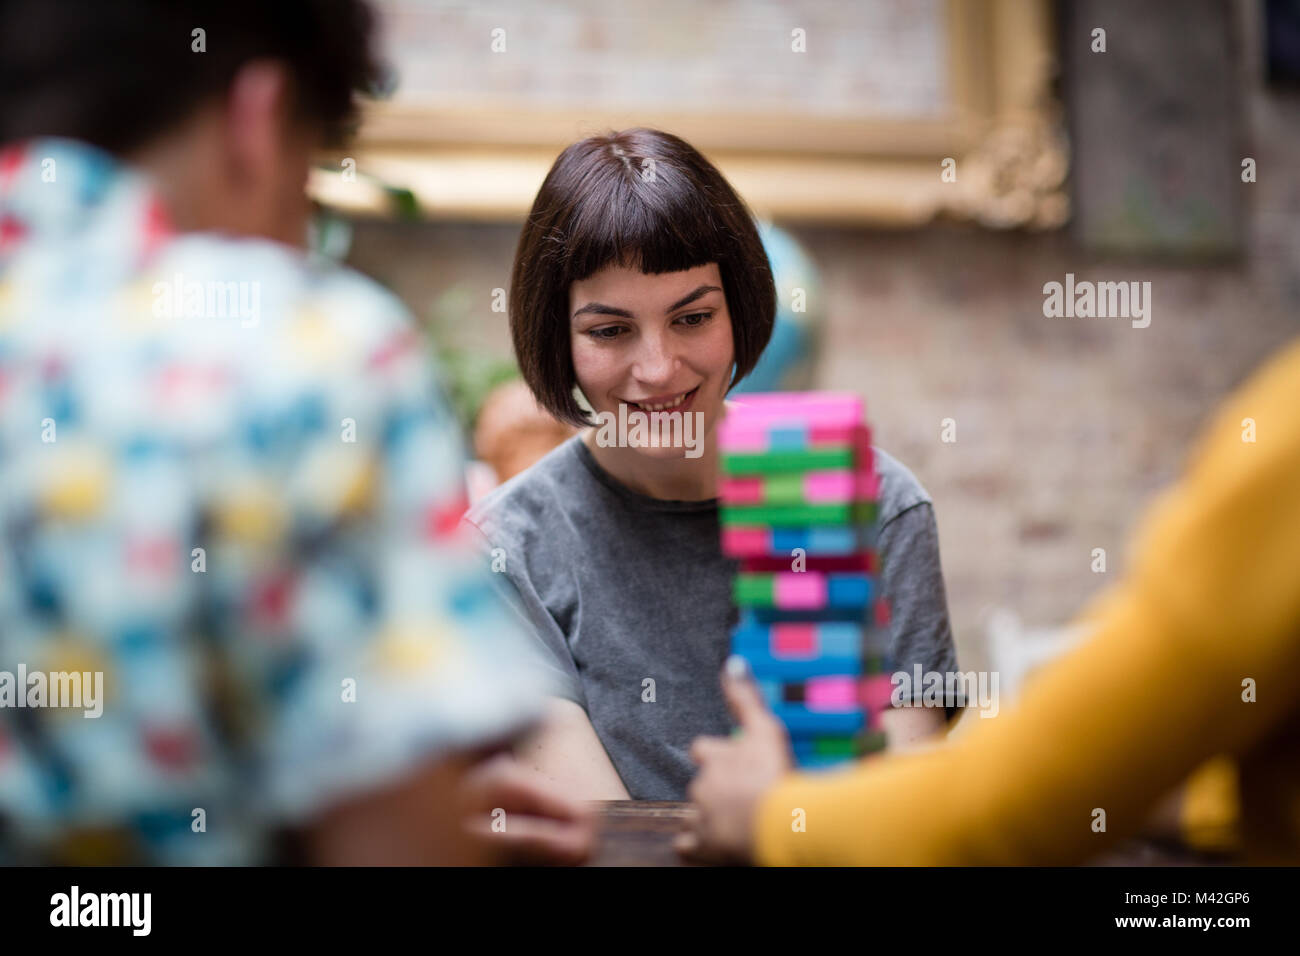 Group of friends playing retro game in pub Stock Photo